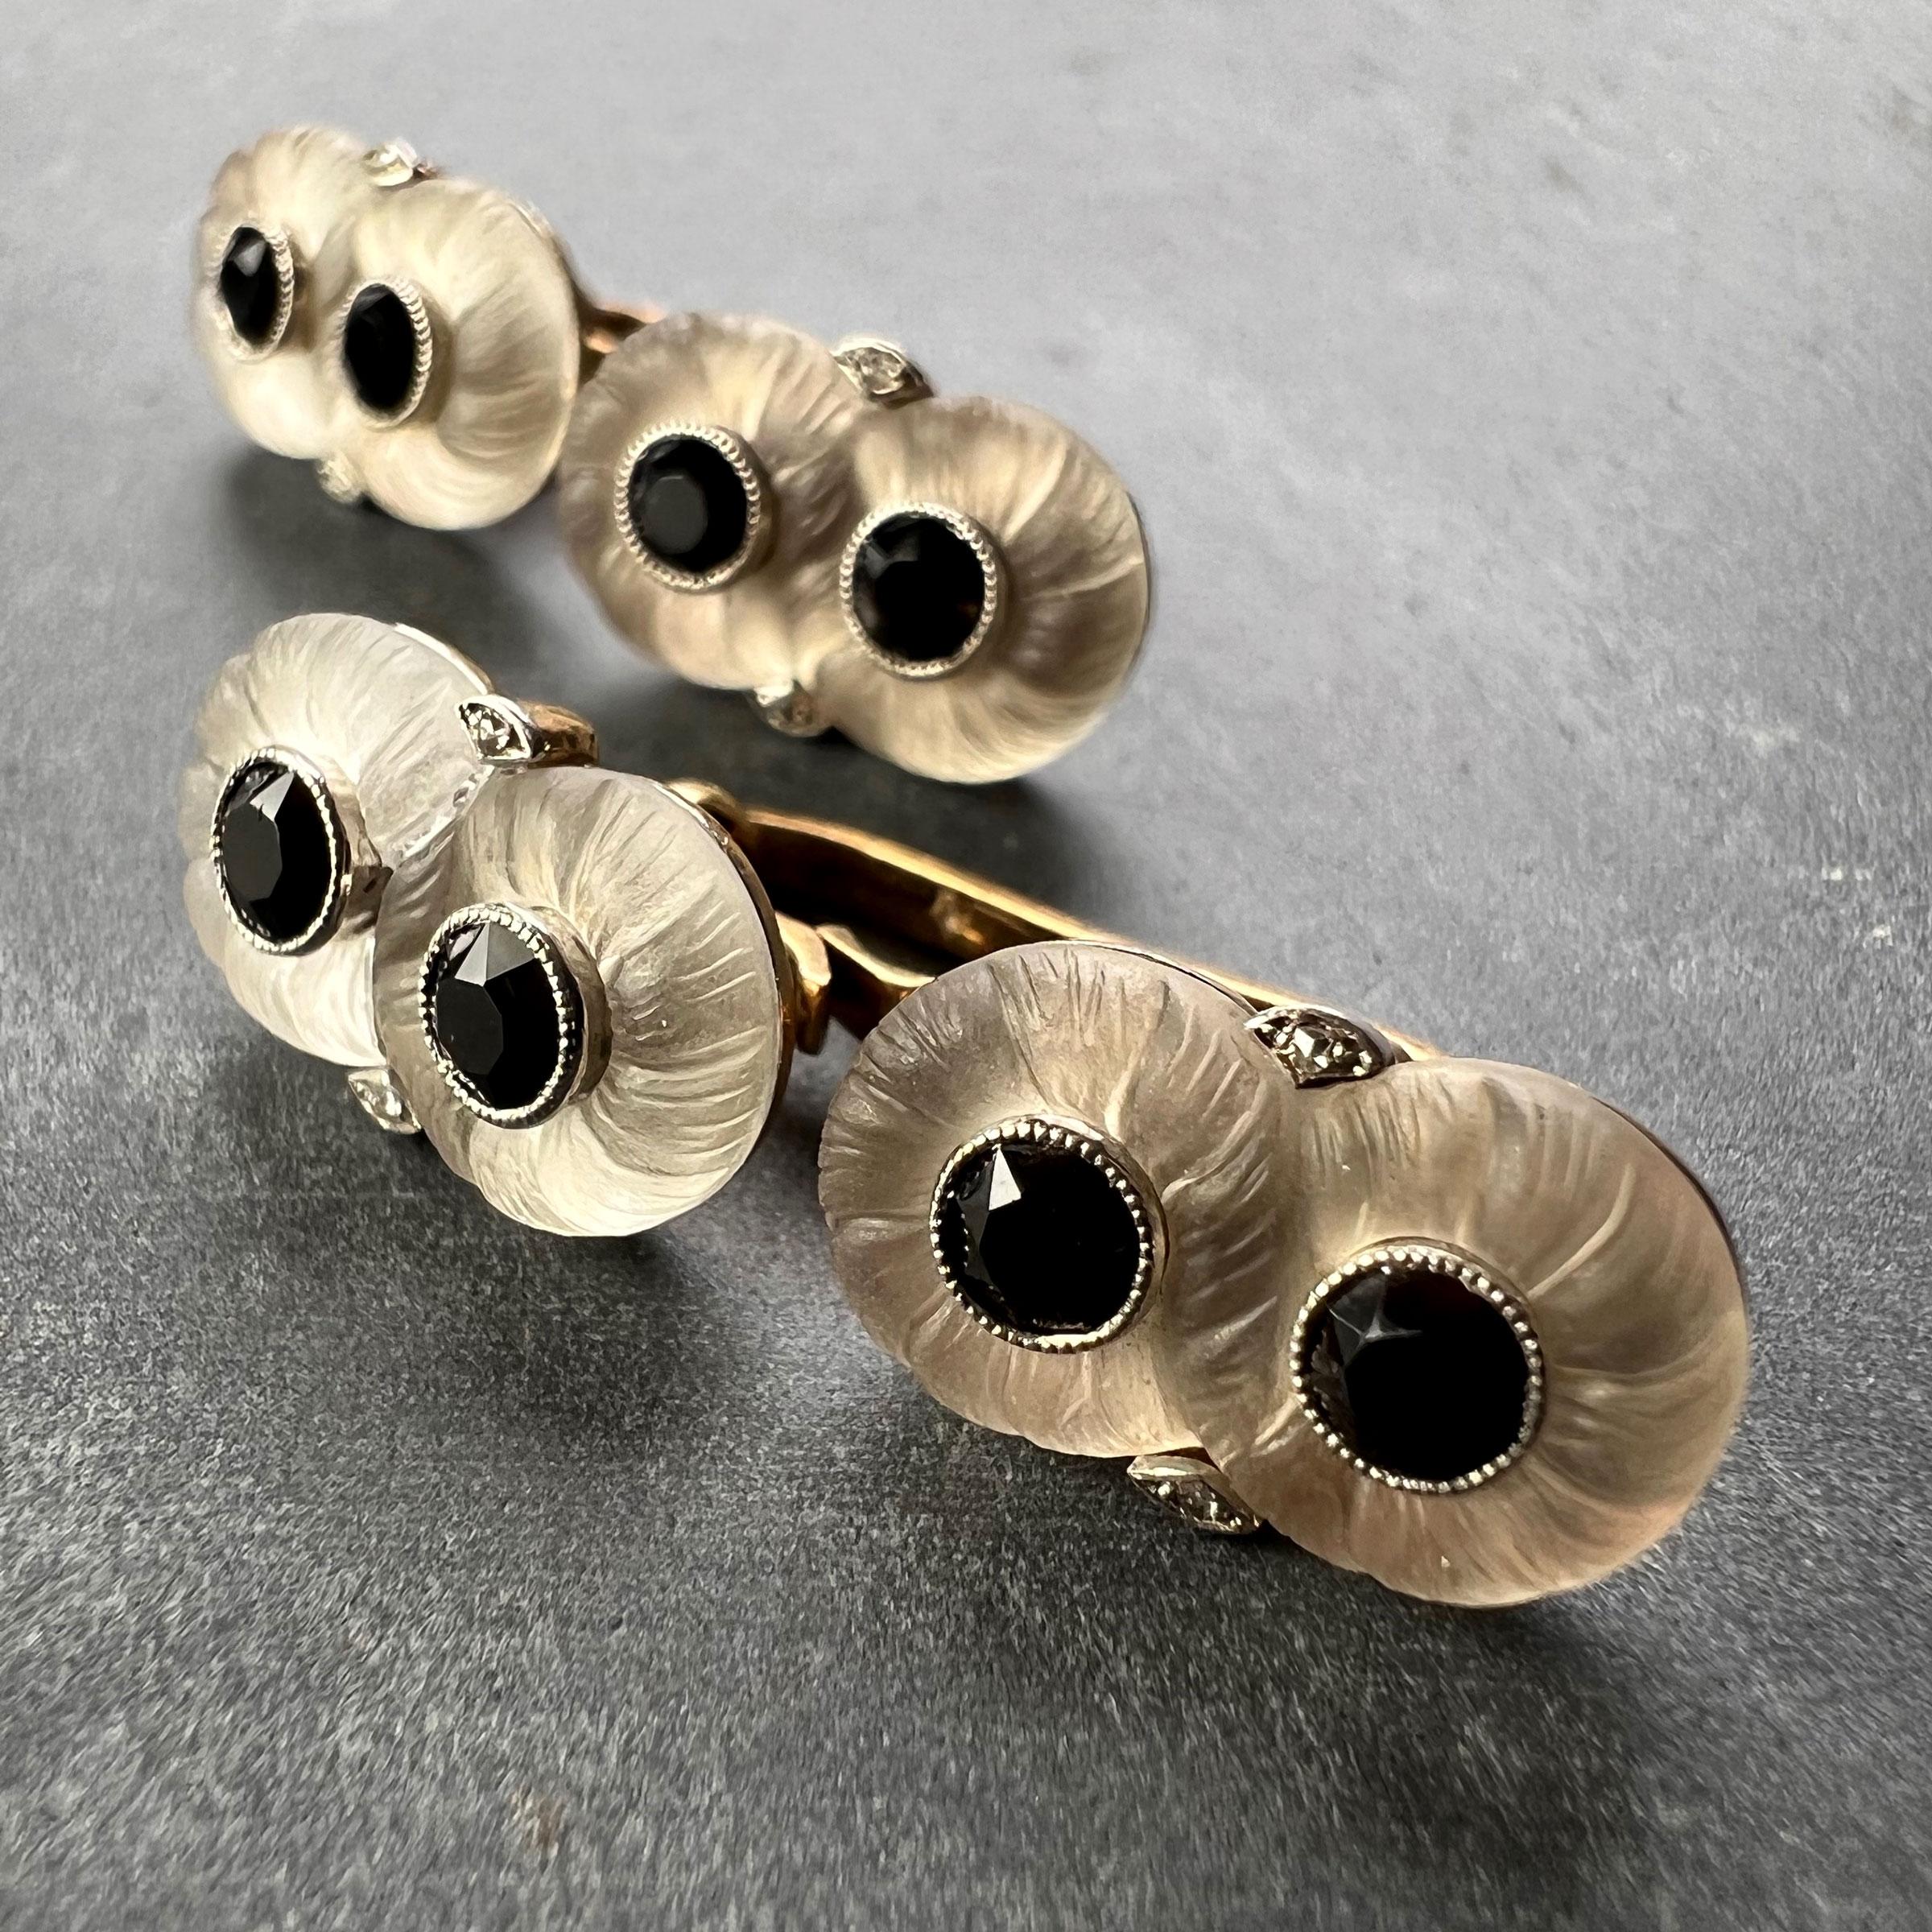 A pair of French 18K (18 karat) yellow gold cufflinks, each end designed as a double floral design in carved rock crystal set with two faceted onyx gems, further highlighted with rose-cut diamonds. Stamped with the eagle’s head for French